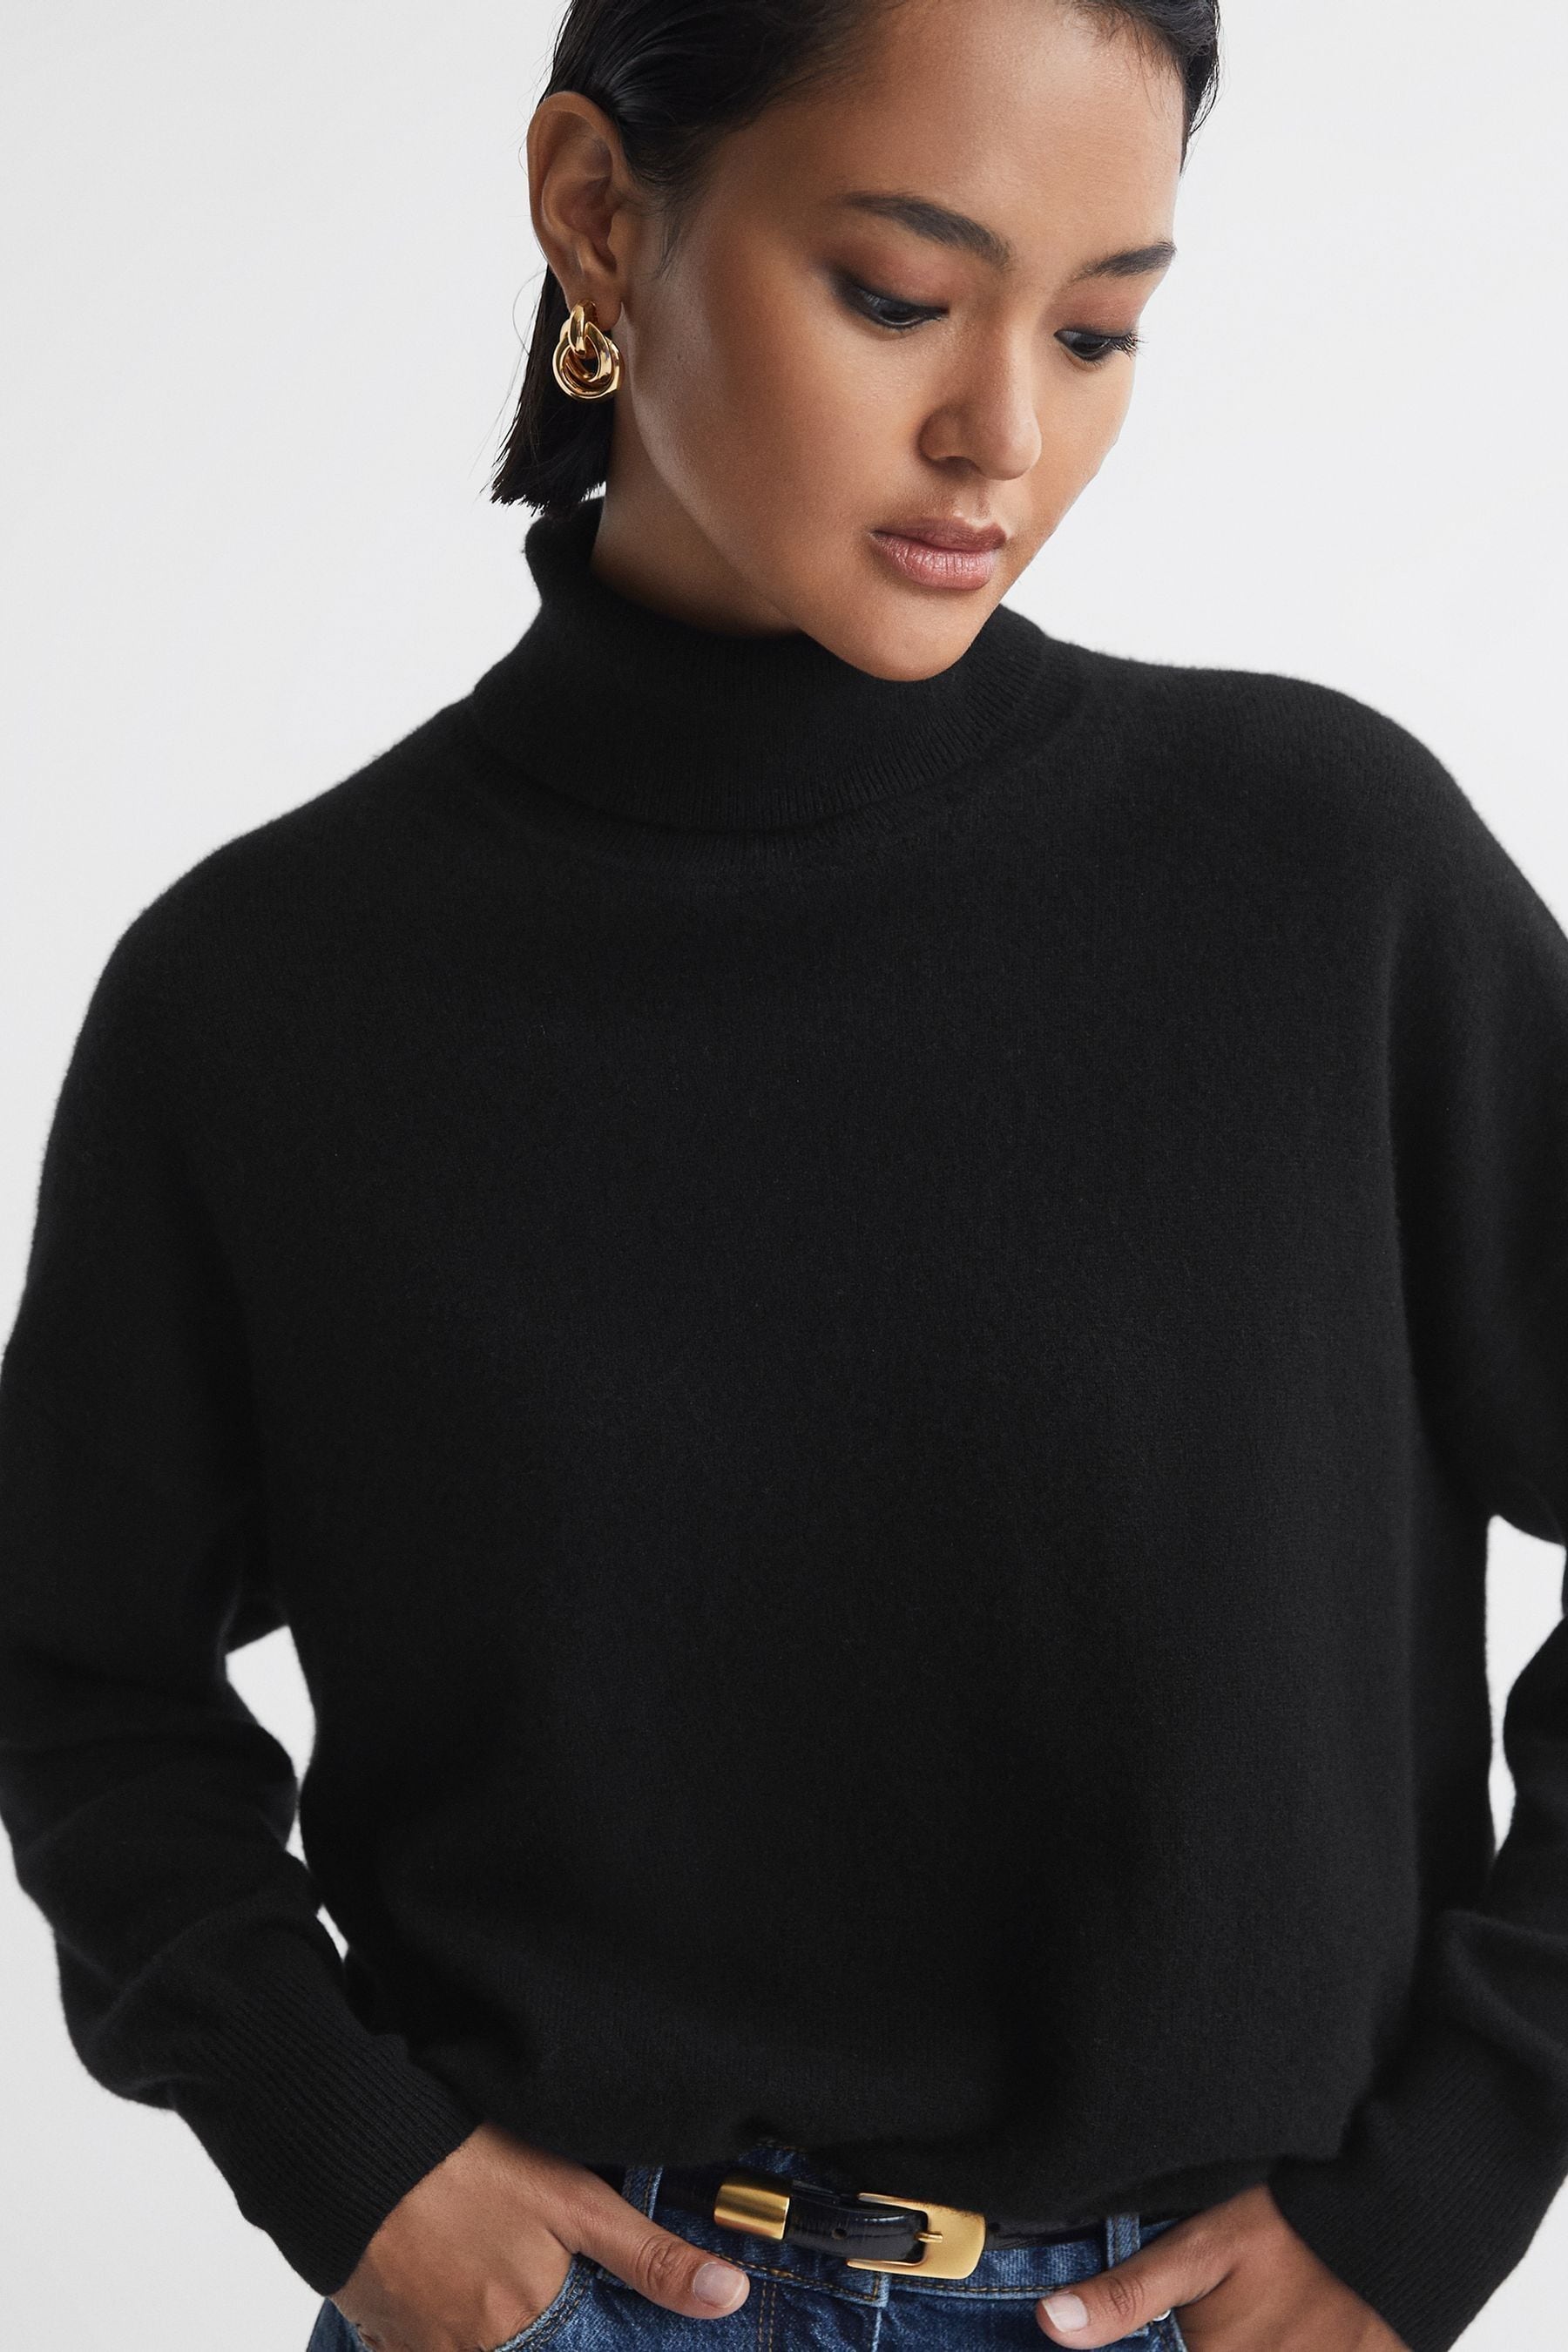 Mabel - Black Fitted Cashmere...